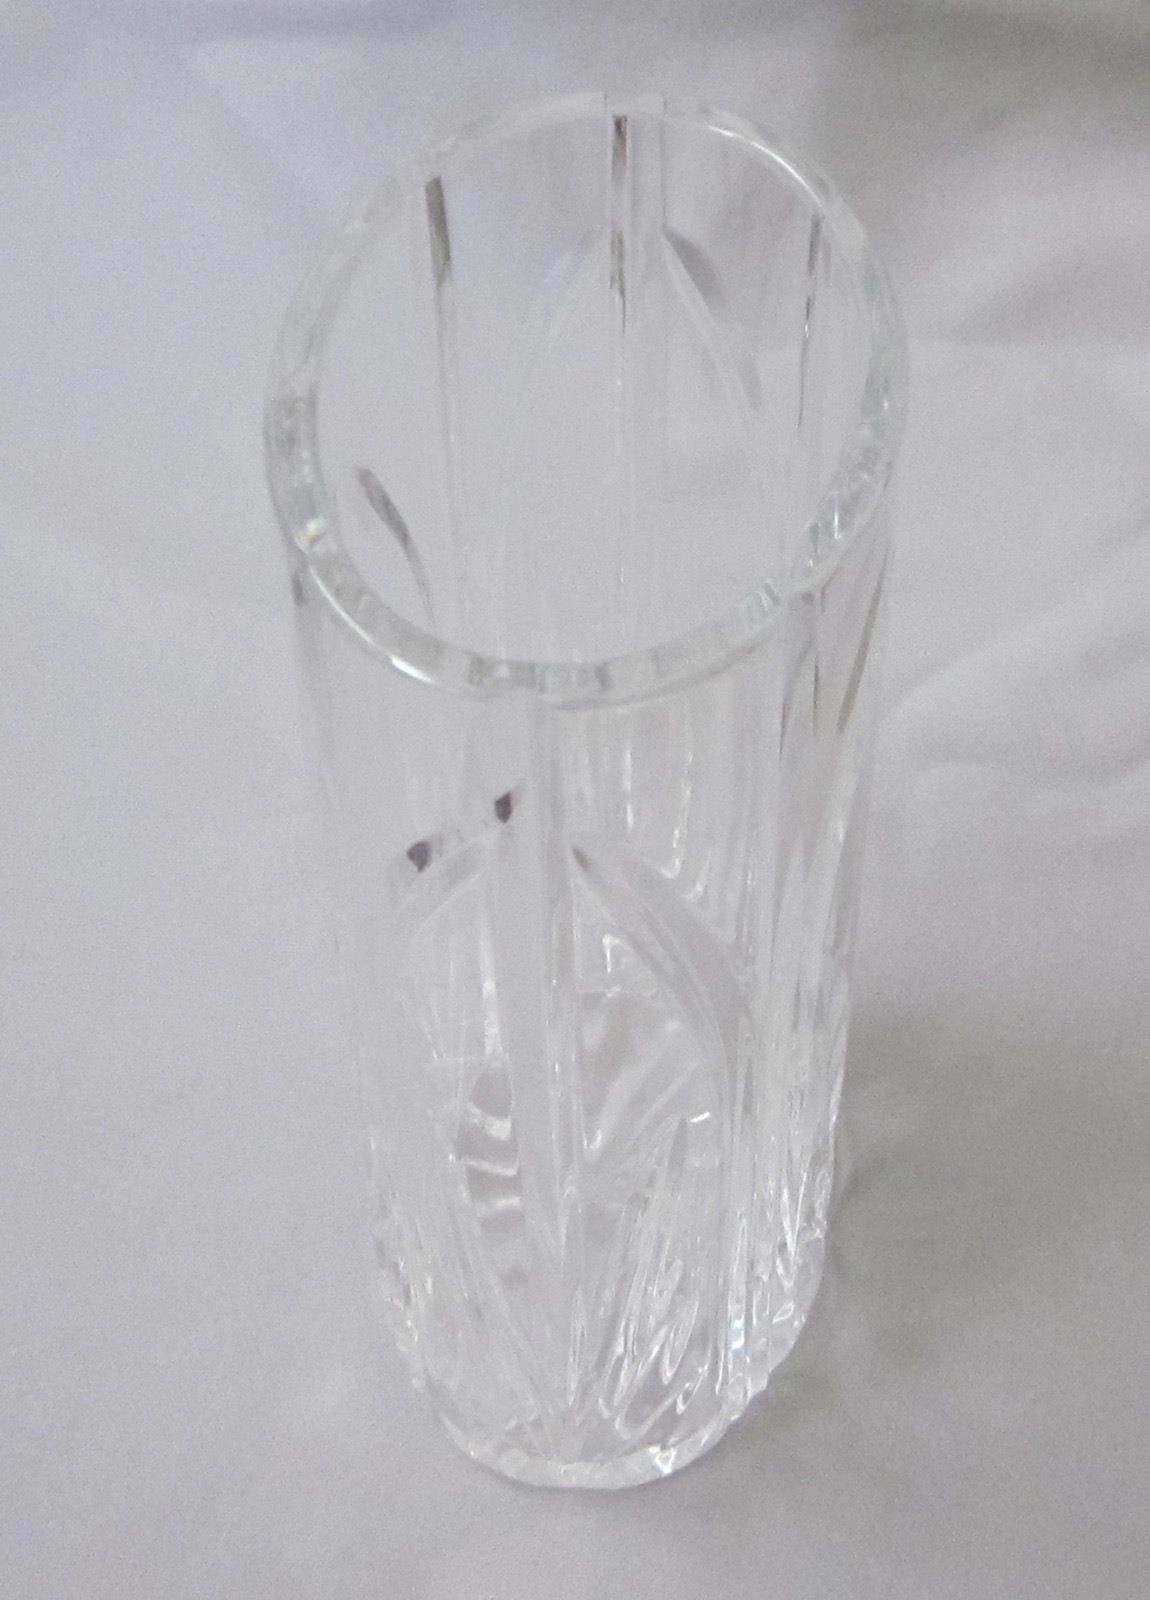 24 Perfect Waterford Lismore 8 Flared Vase 2024 free download waterford lismore 8 flared vase of 10 vase waterford crystal castleton pattern 67 60 picclick for 10 vase waterford crystal castleton pattern